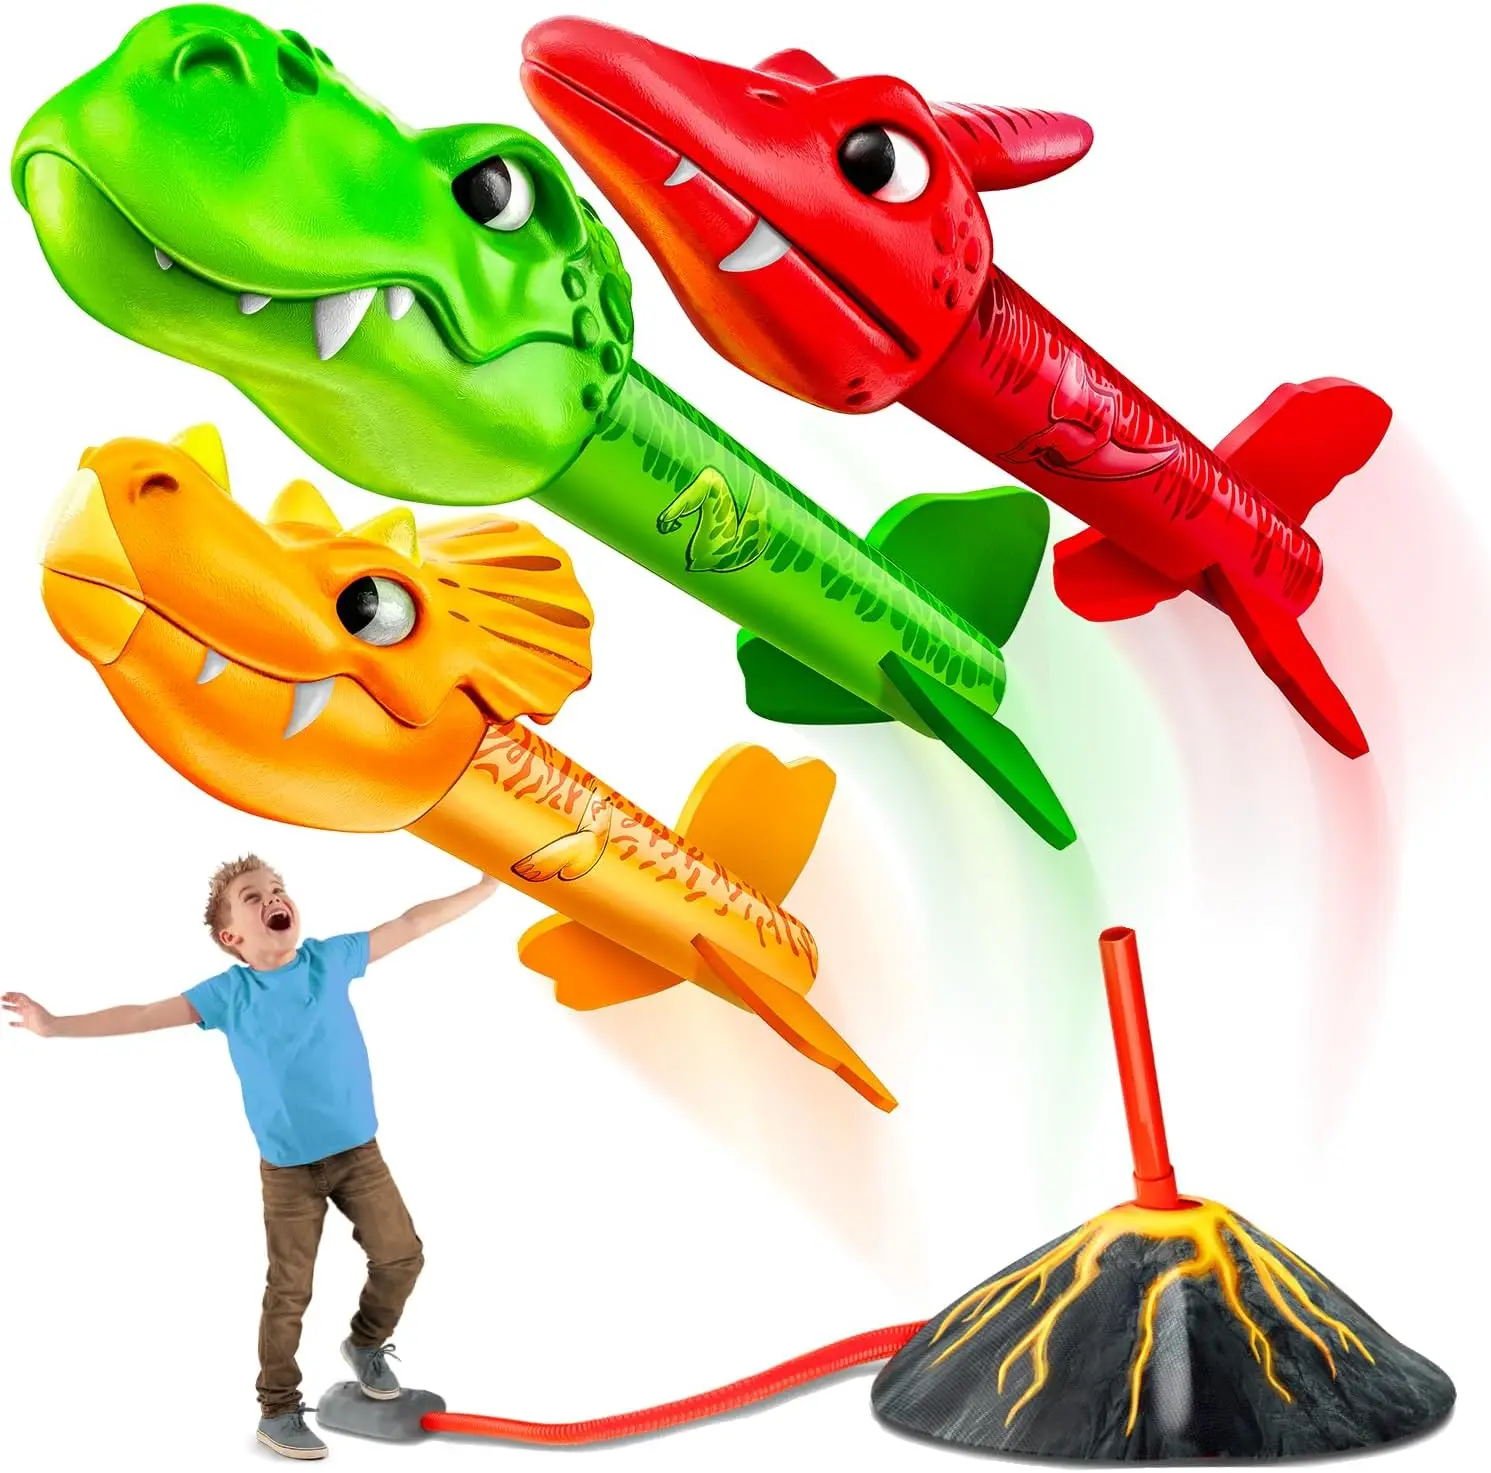 EPT Water Stomp Replacement Dinosaur Rocket Launcher Toy for Kids